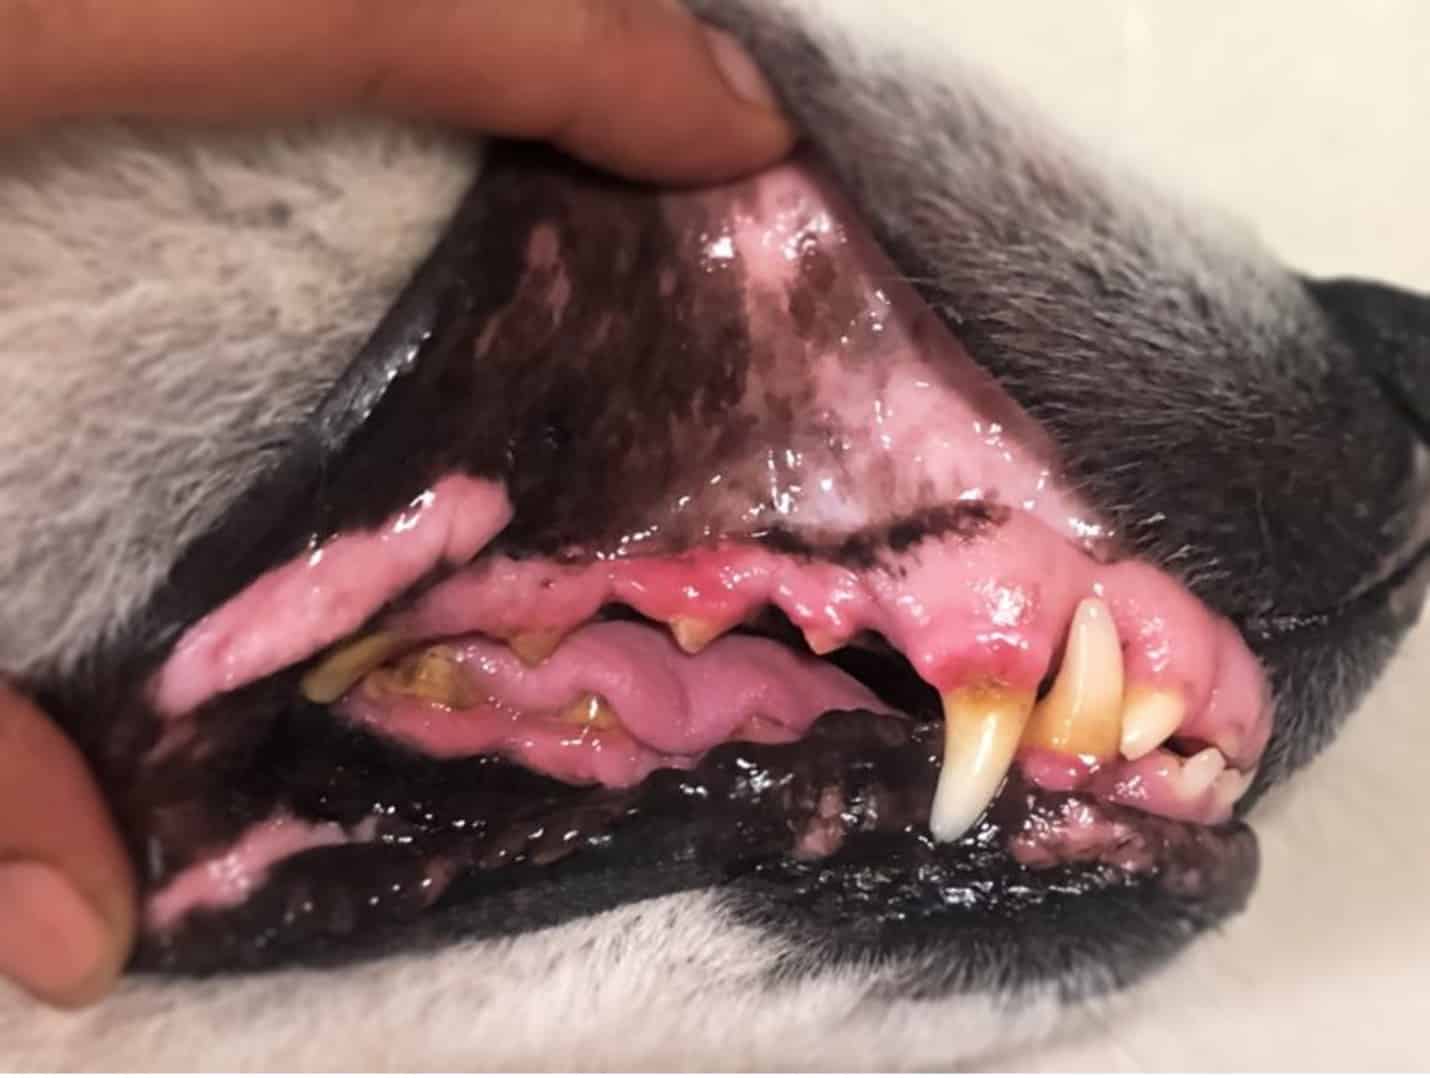 Signs of dental issues in your dog are  bad breath, loose or missing teeth, excessive drooling, and difficulty eating or chewing.